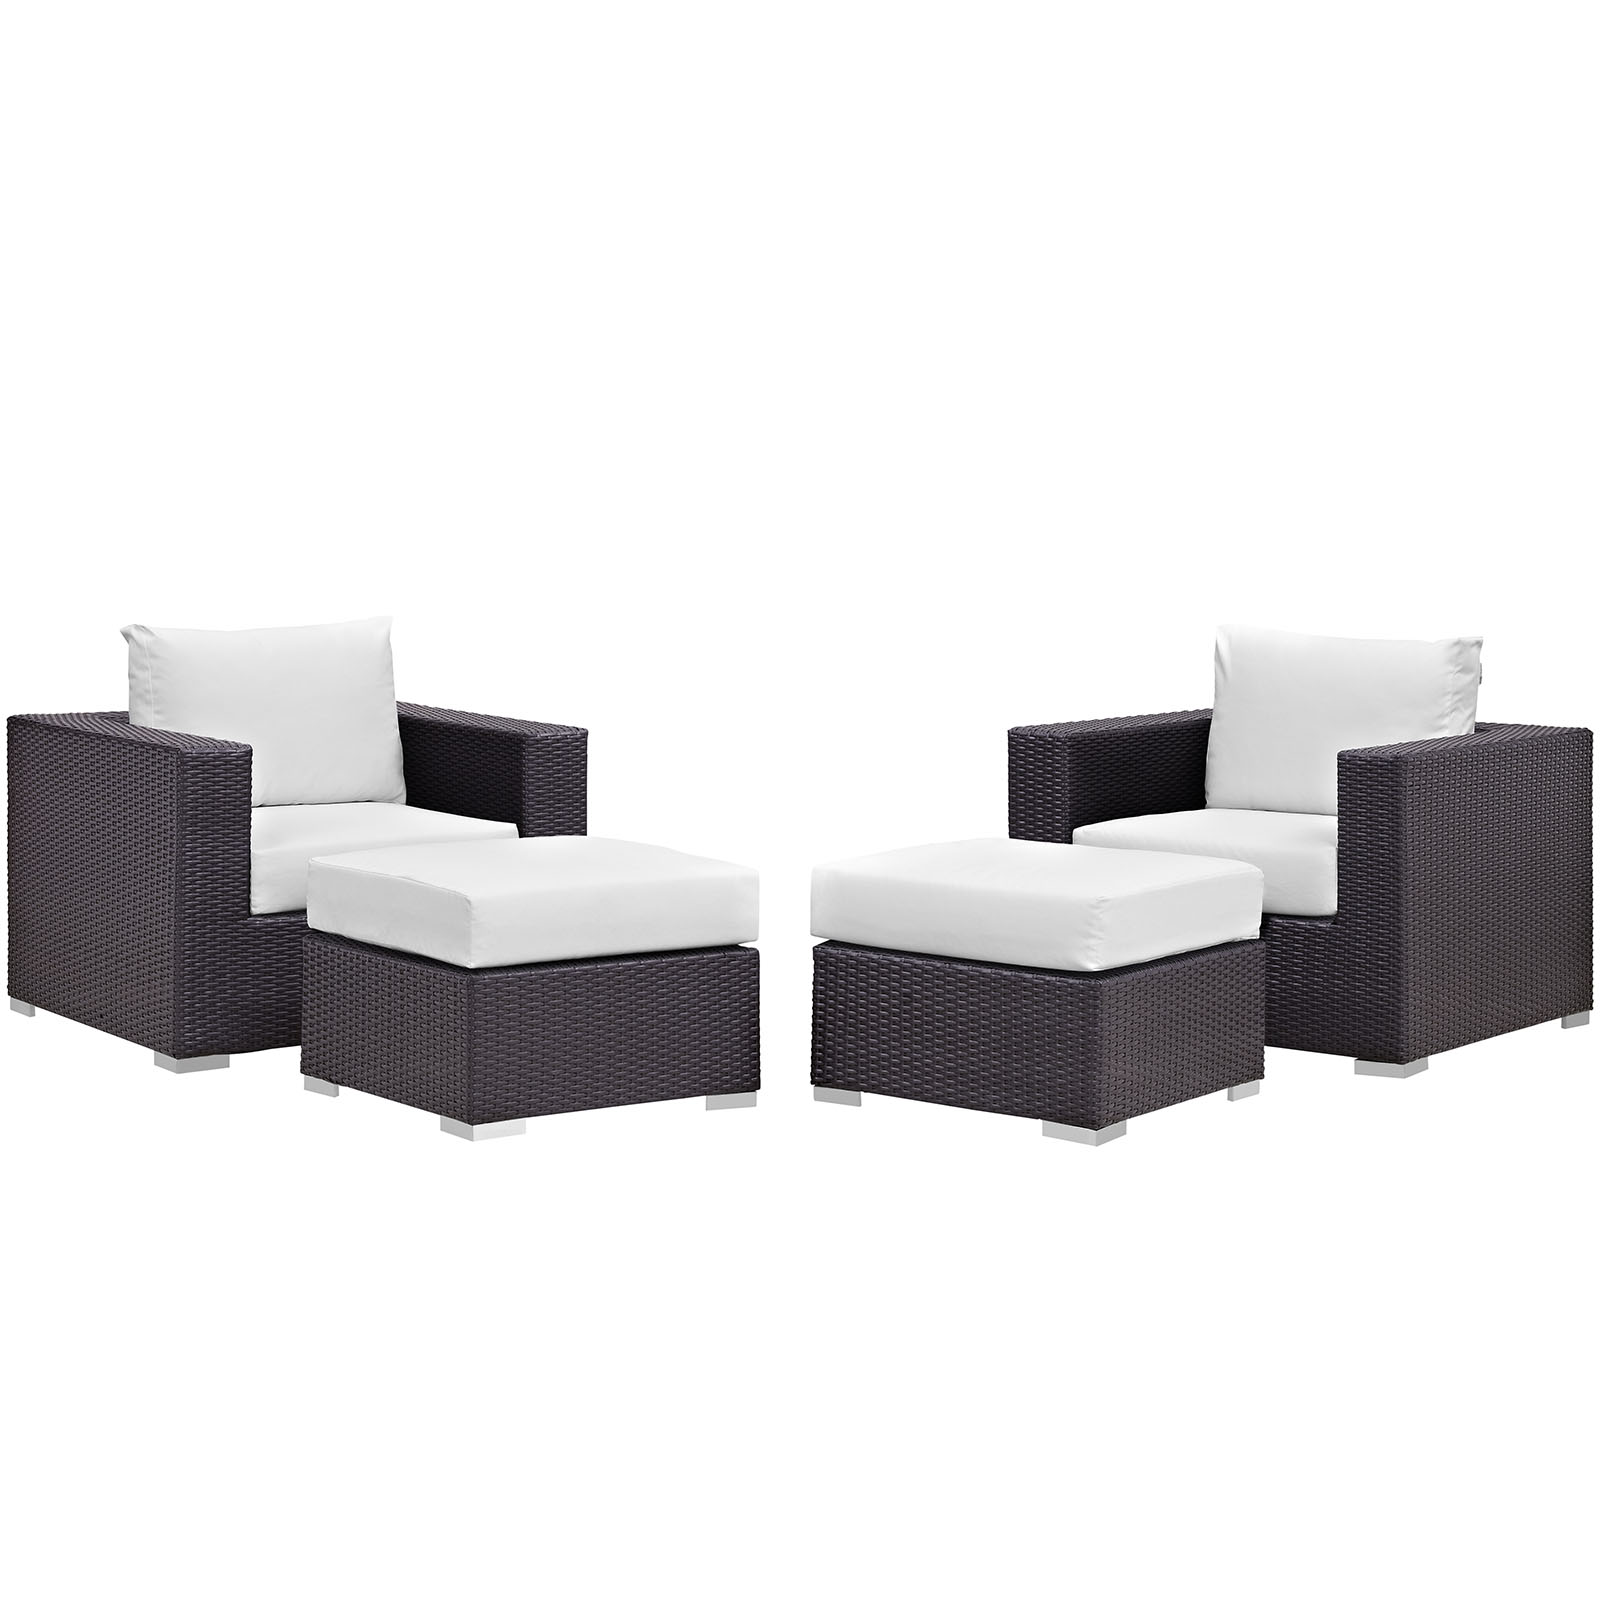 Modway Convene 4 Piece Outdoor Patio Sectional Set in Espresso White - image 2 of 6